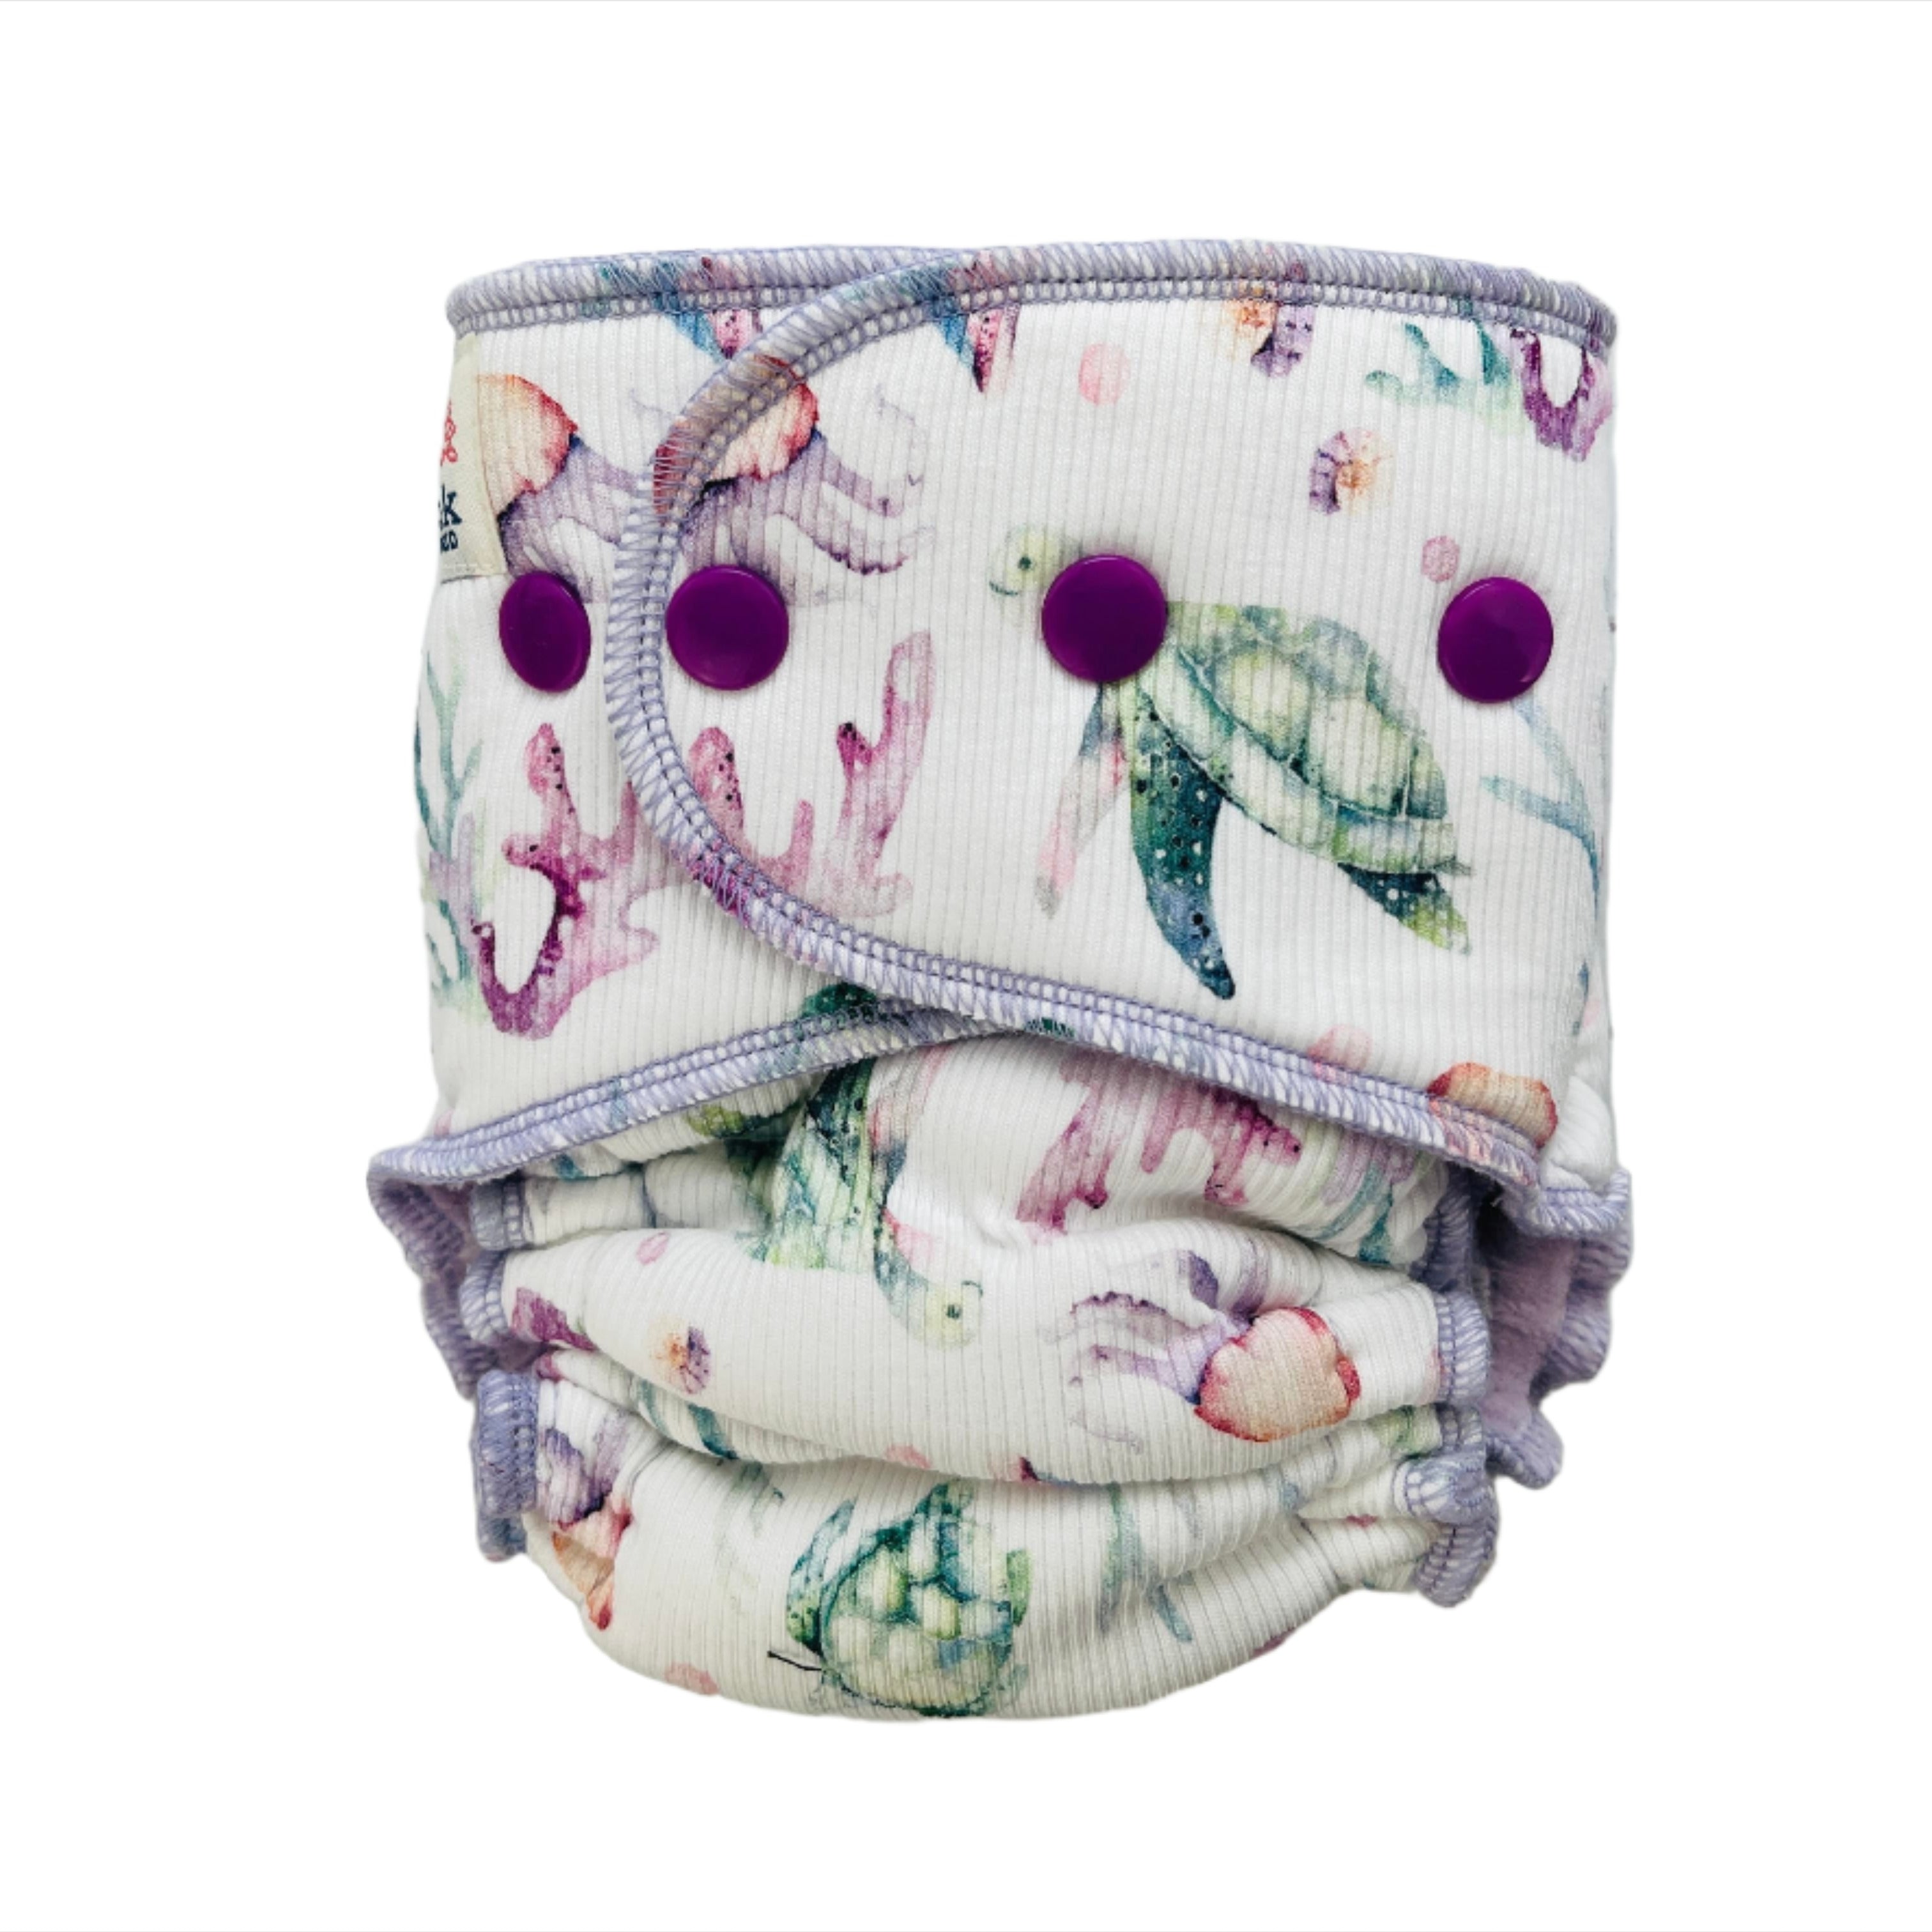 Lilly & Frank Fitted Cloth Diaper Sea Turtles Petite Hybrid Cloth Diaper - Hybrid - Classic Serged